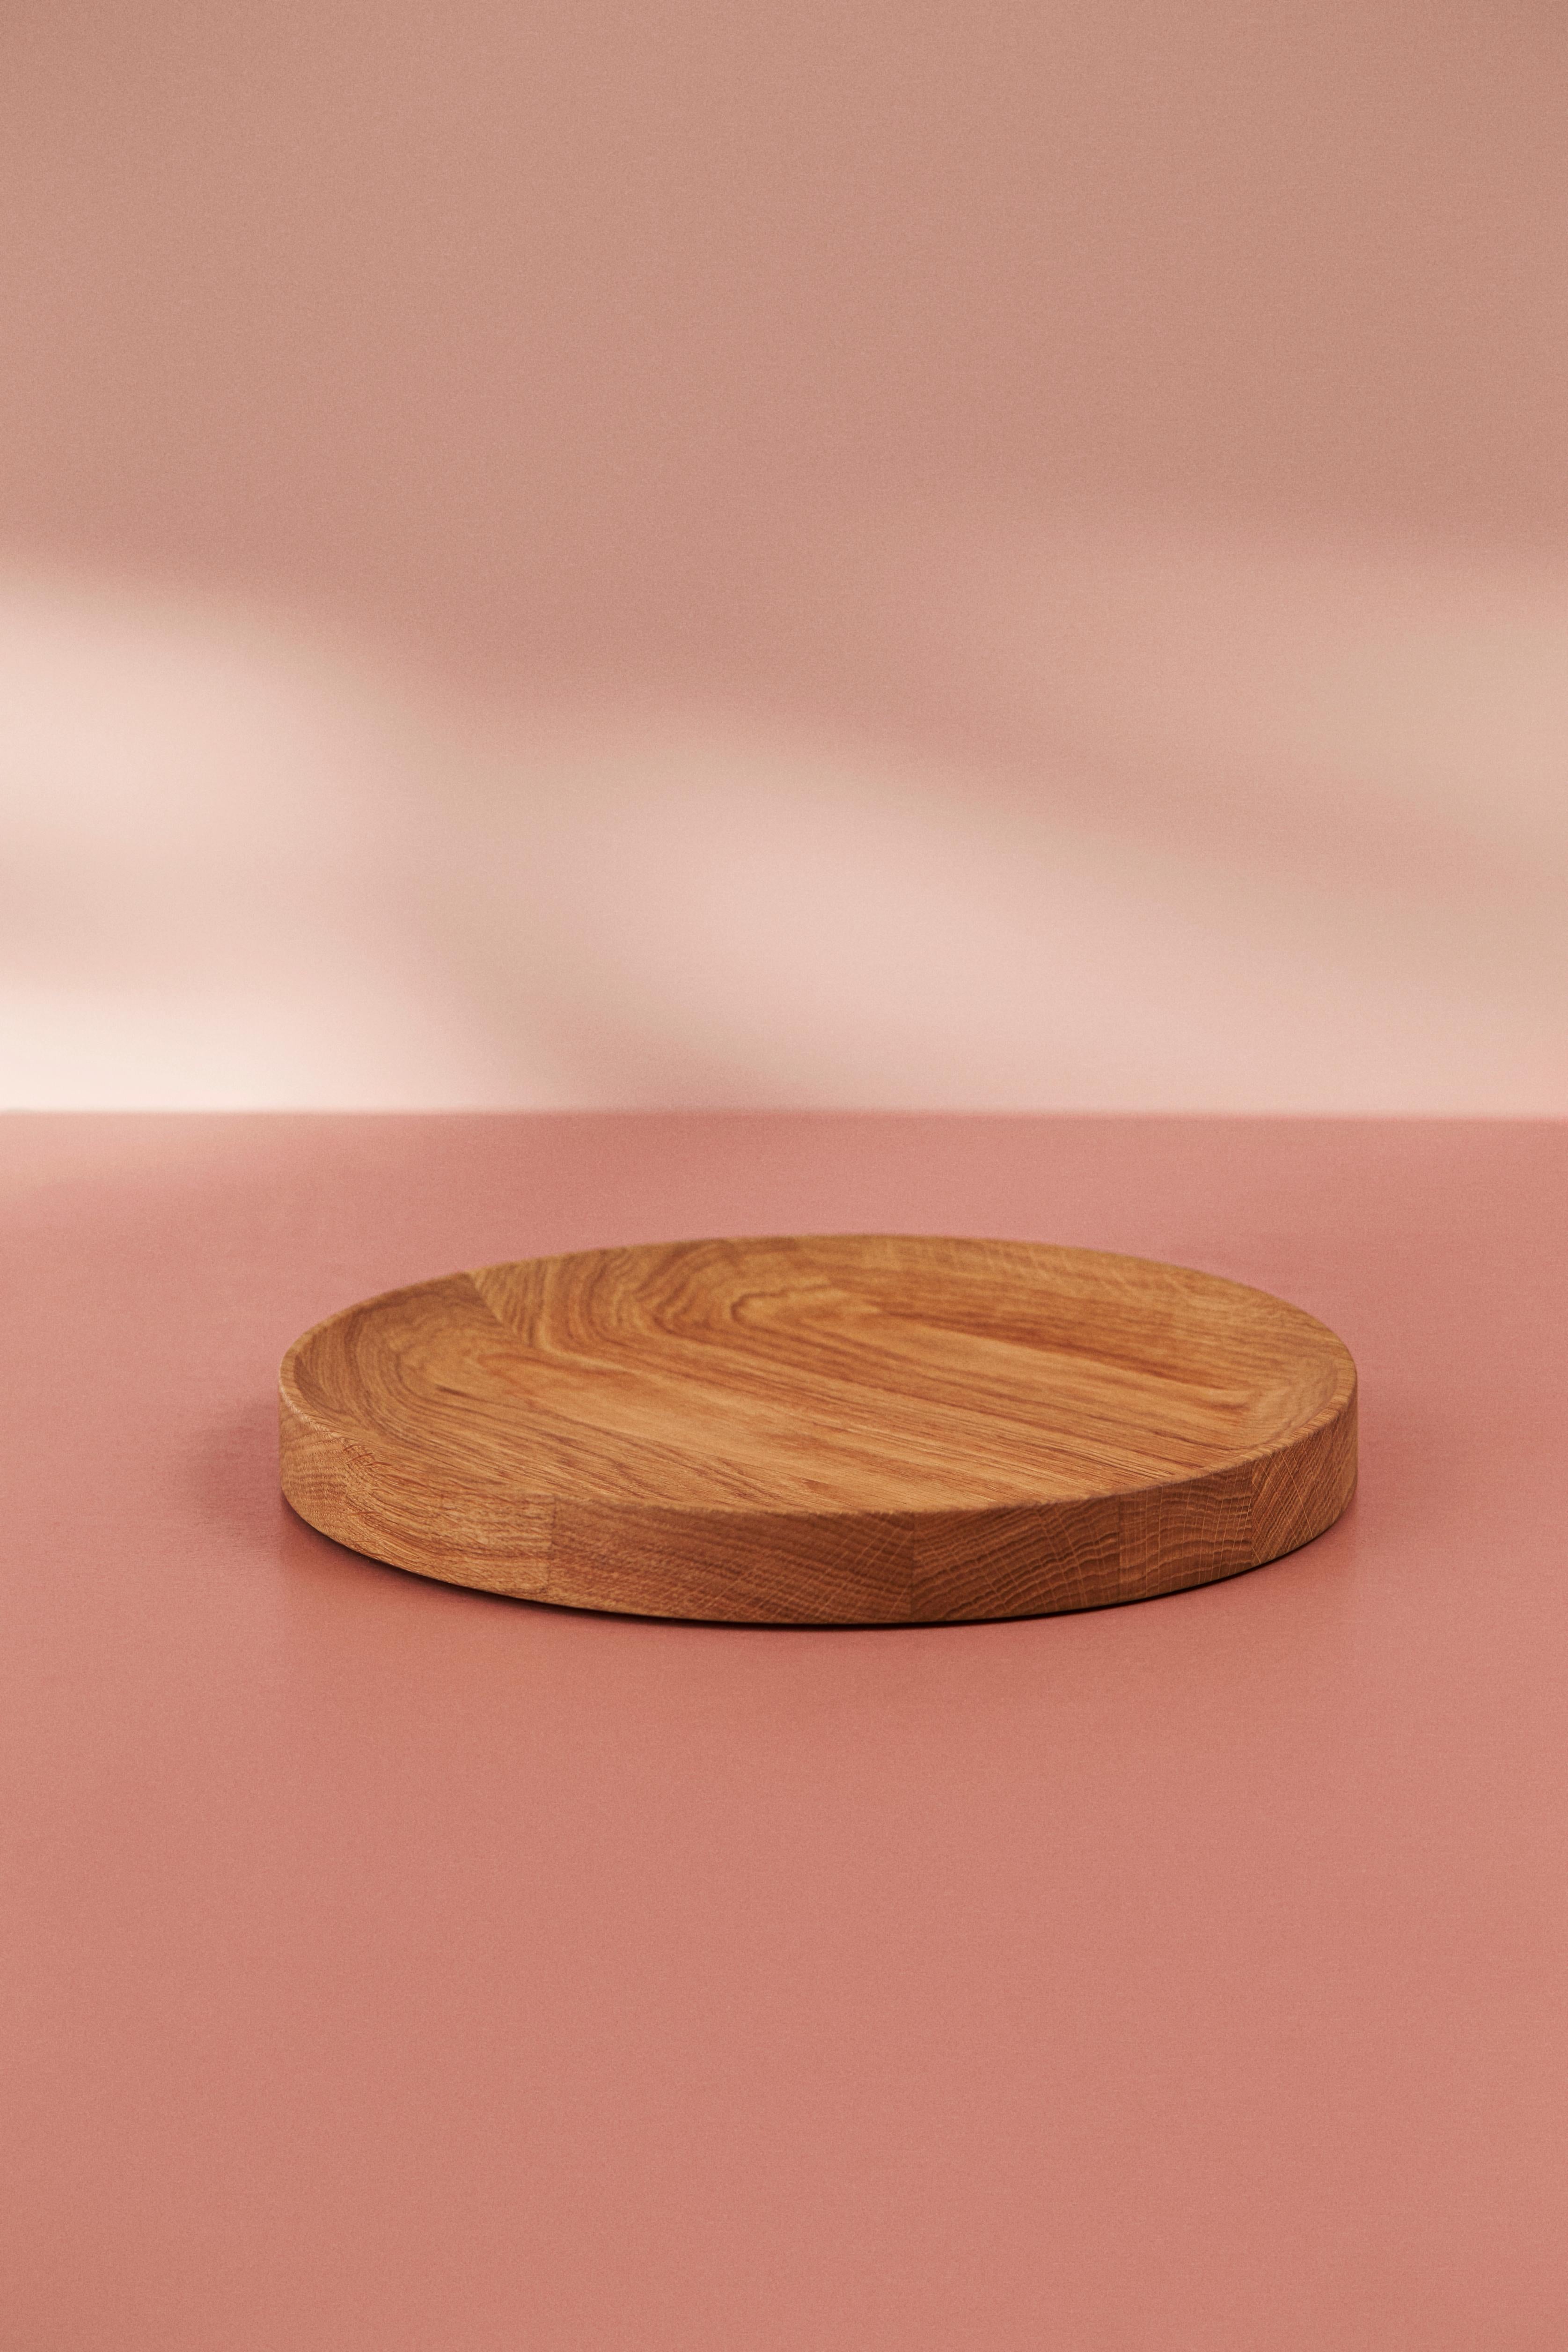 Exquisite wooden trays with an organic design and understated elegance. The Carved Wood trays are made of solid wood, exuding an exclusivity that makes them a beautiful bed for fruit, vegetables and nuts, an elegant design element in a still life